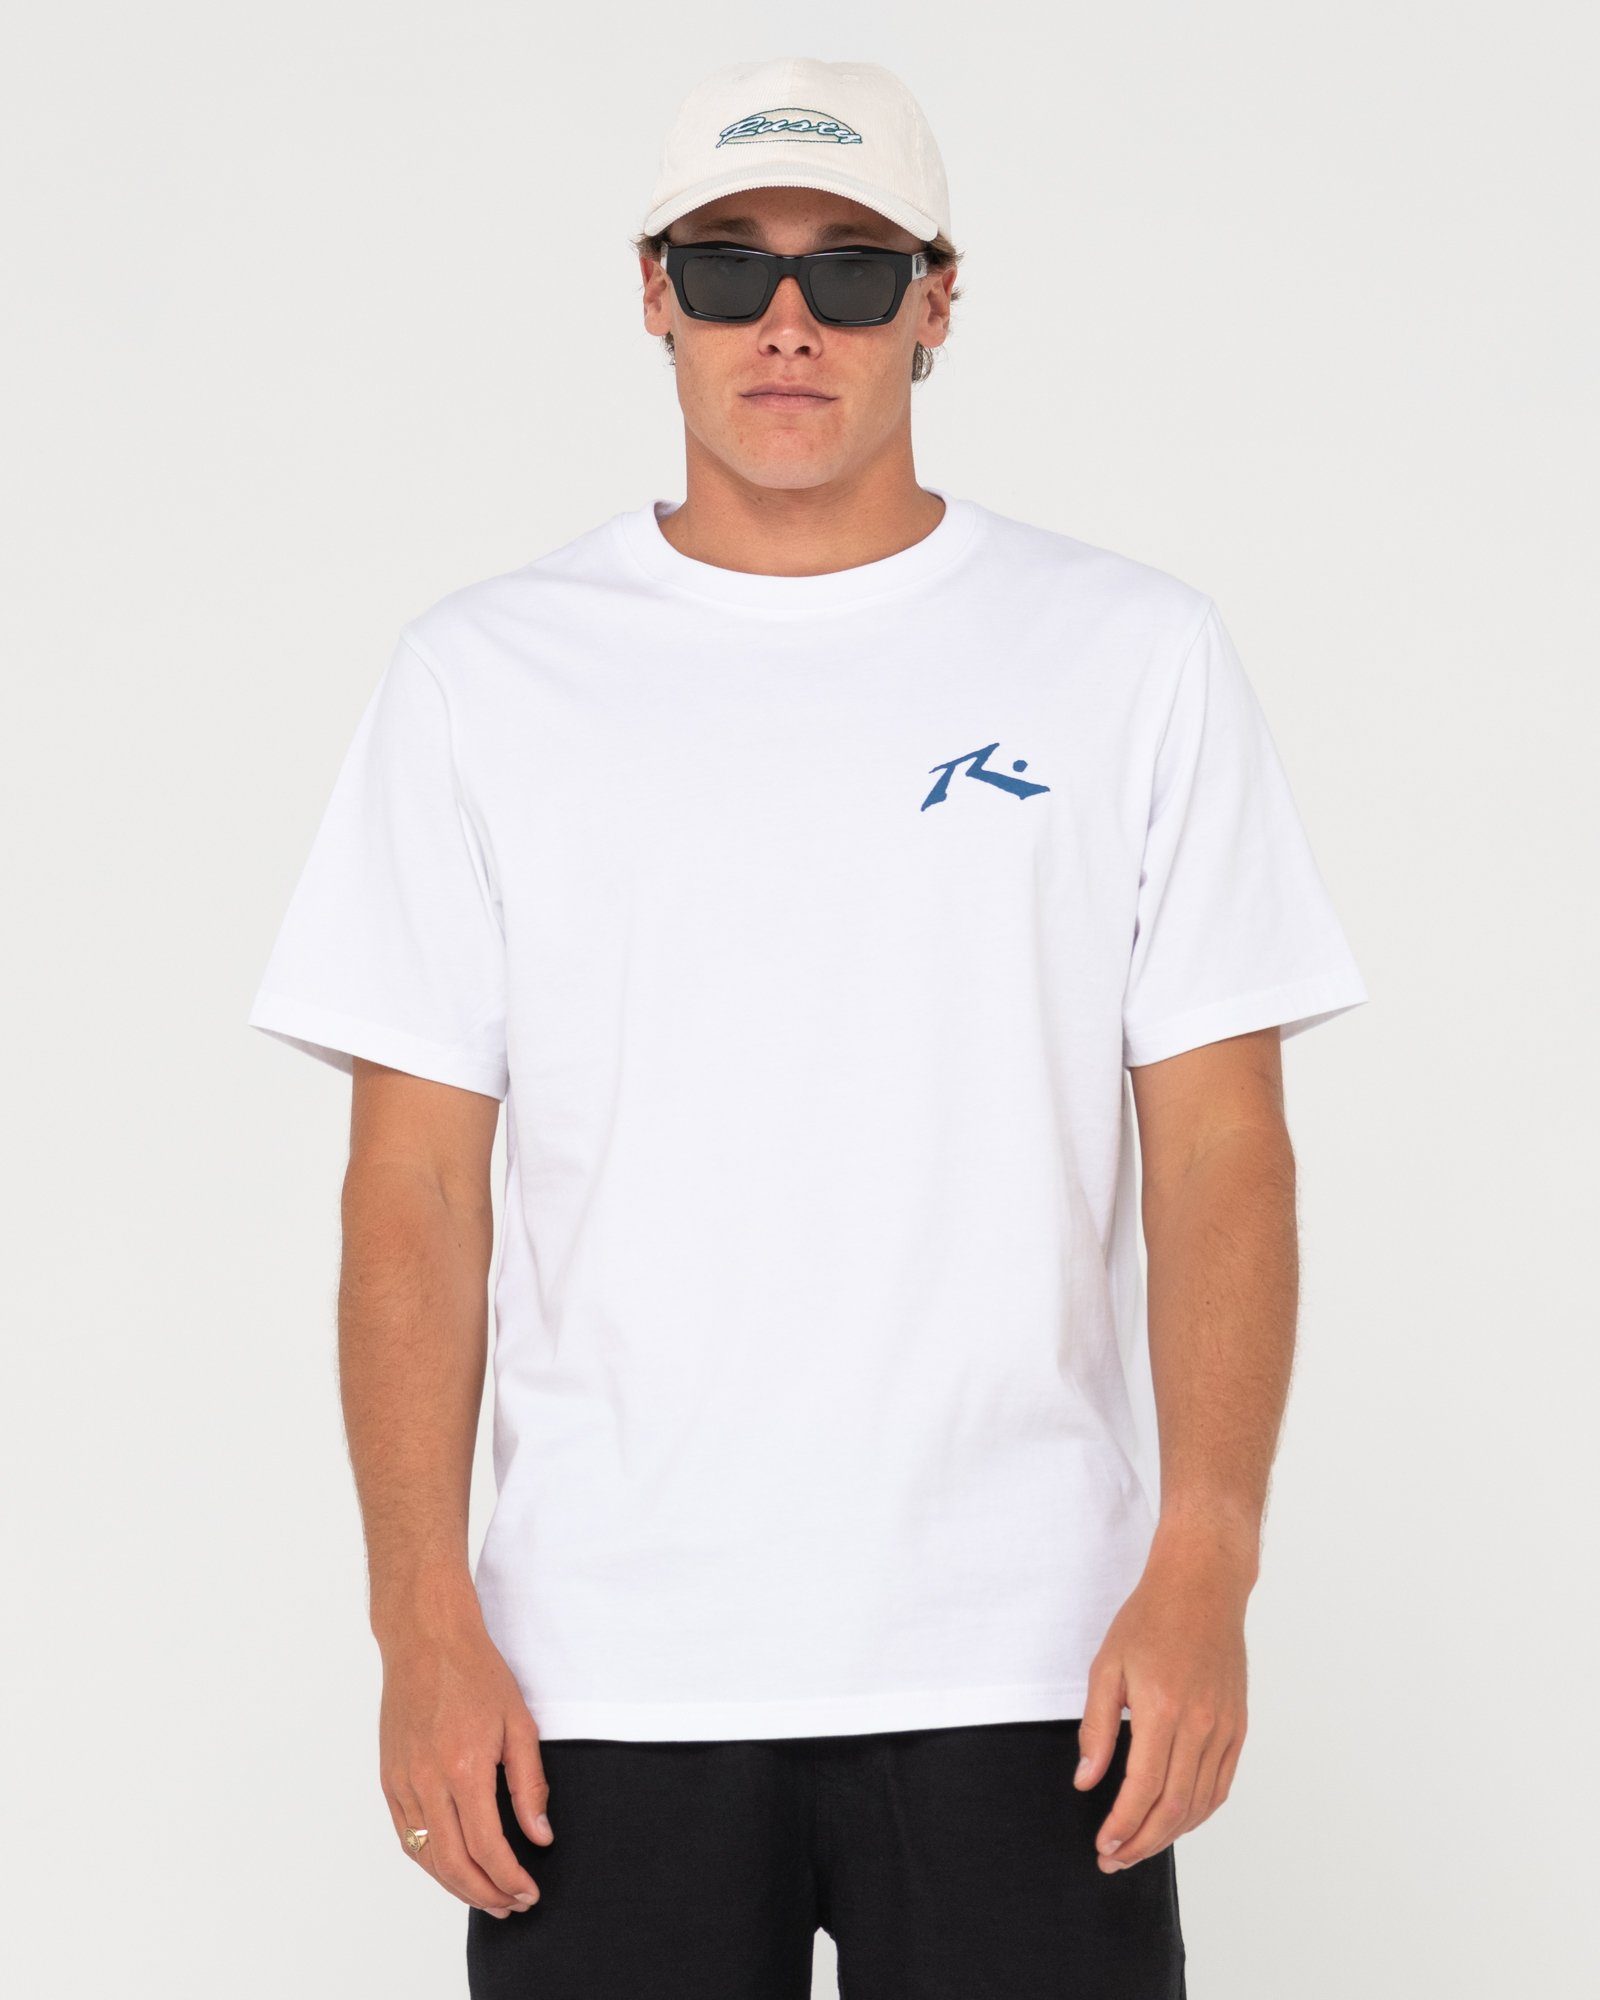 COMPETITION White SHORT T-Shirt Blue SLEEVE / Rusty TEE